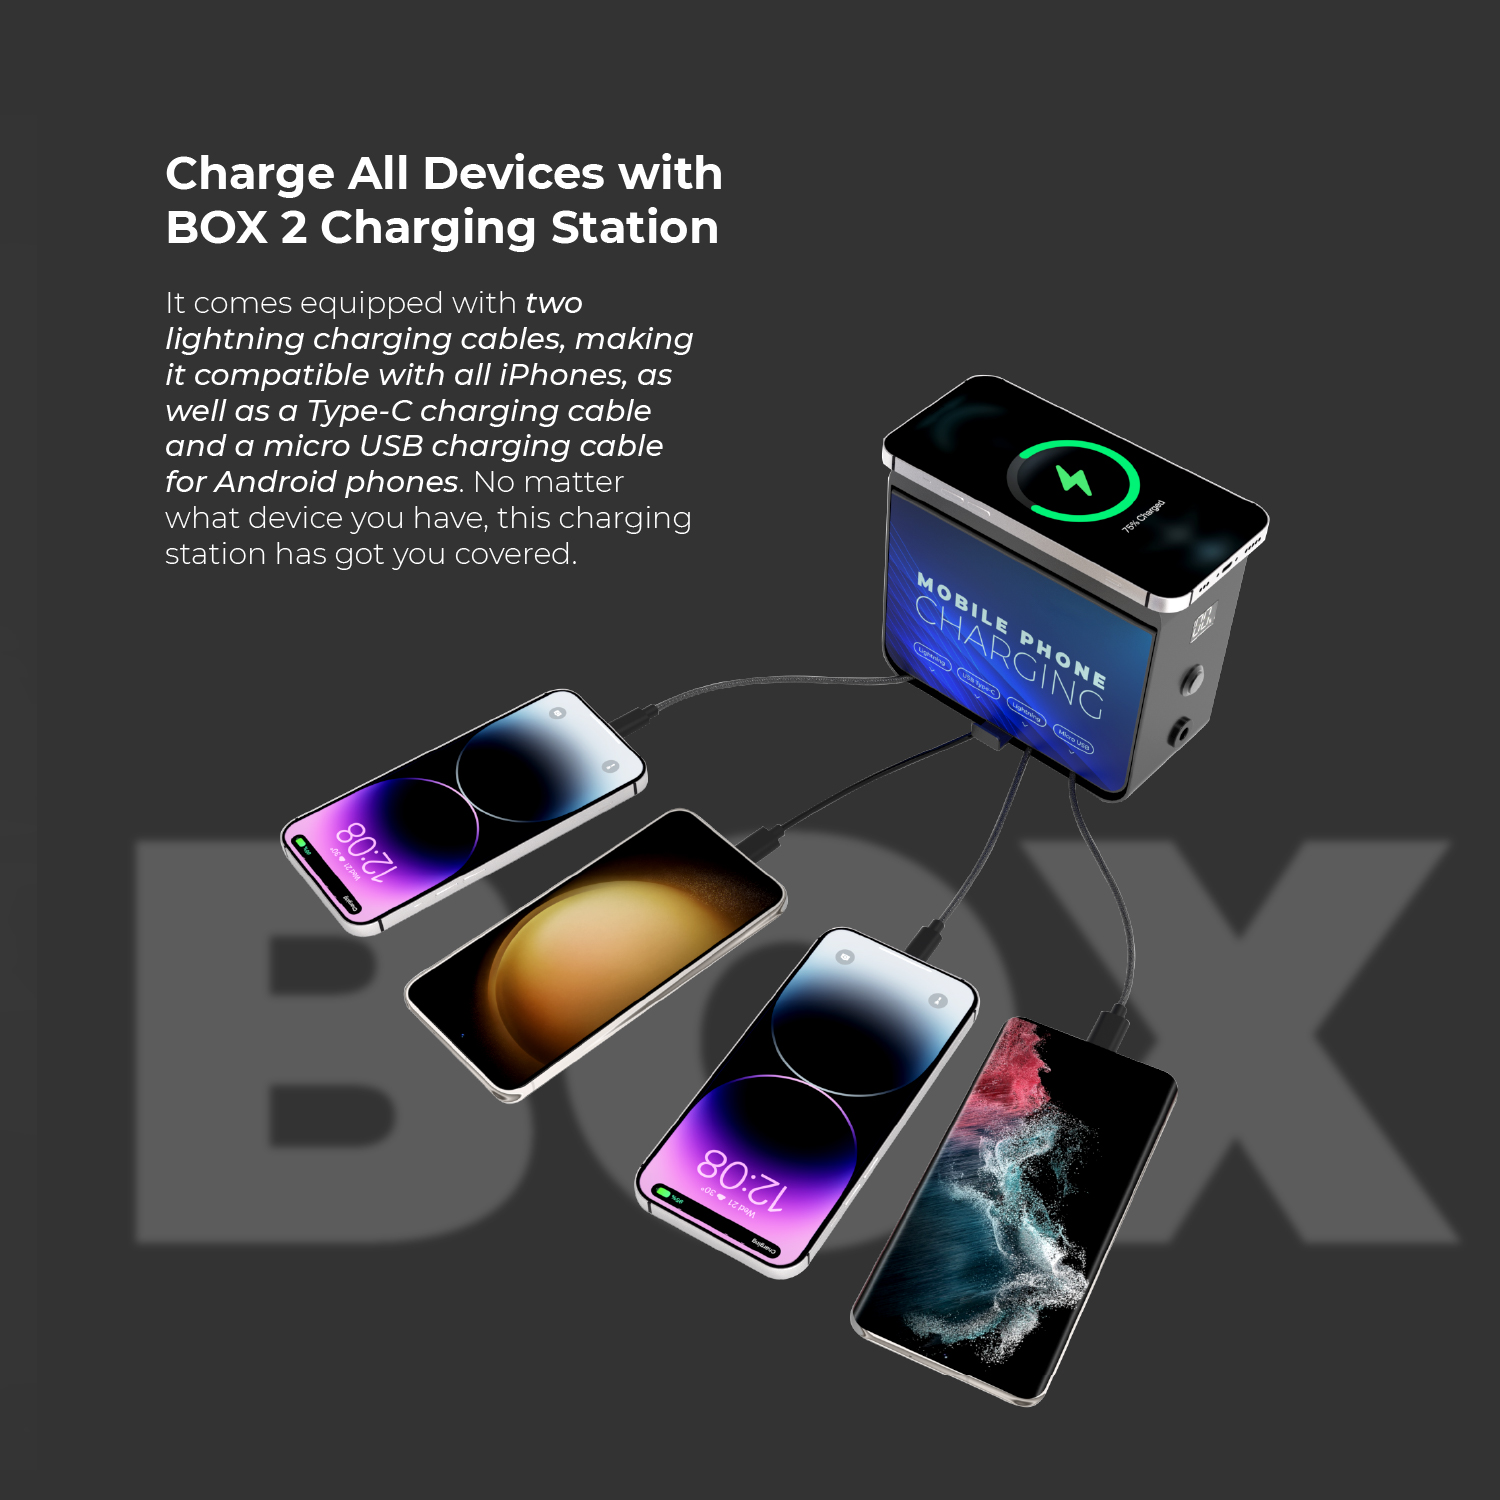 BOX 2 Battery Powered Desktop Charging Station - Y2 Power Solutions